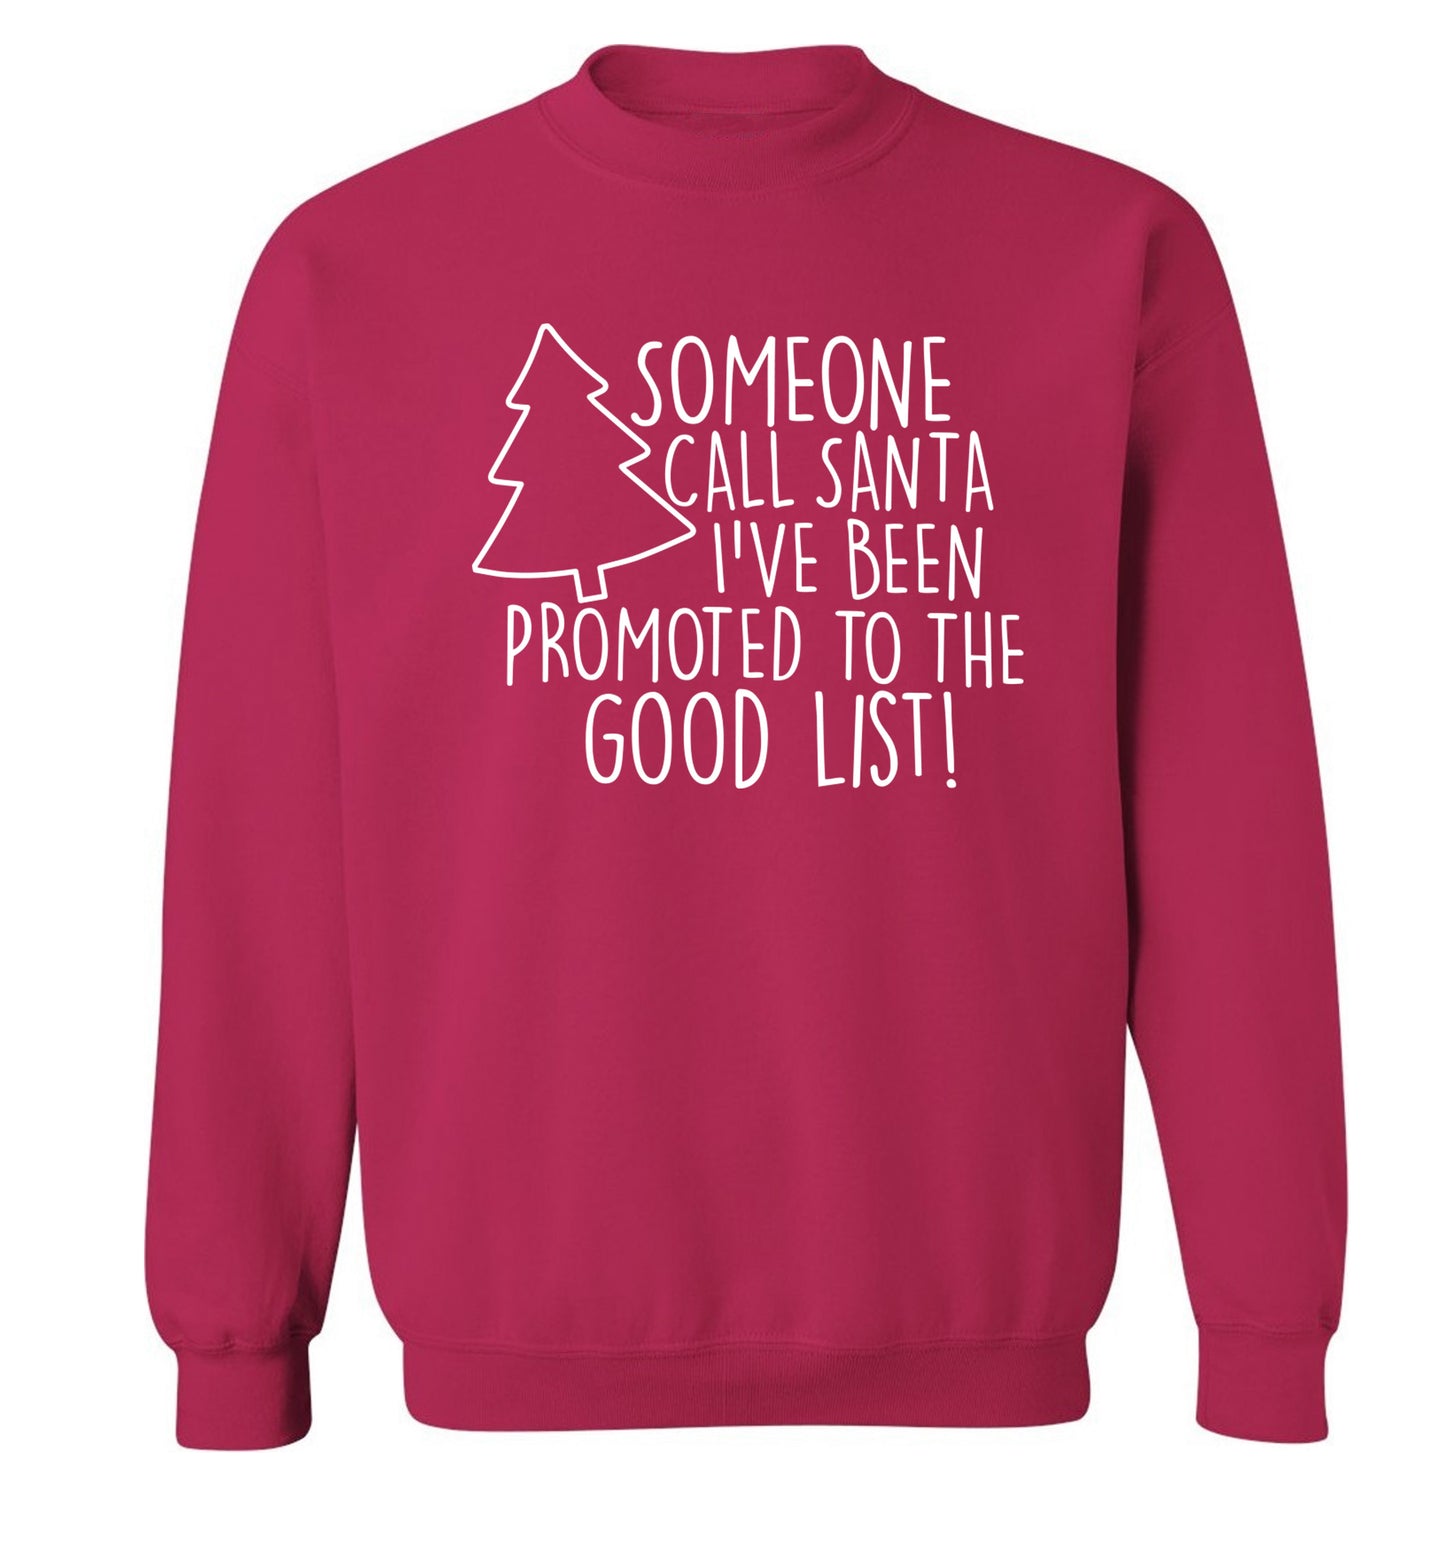 Someone call santa I've been promoted to the good list! Adult's unisex pink Sweater 2XL